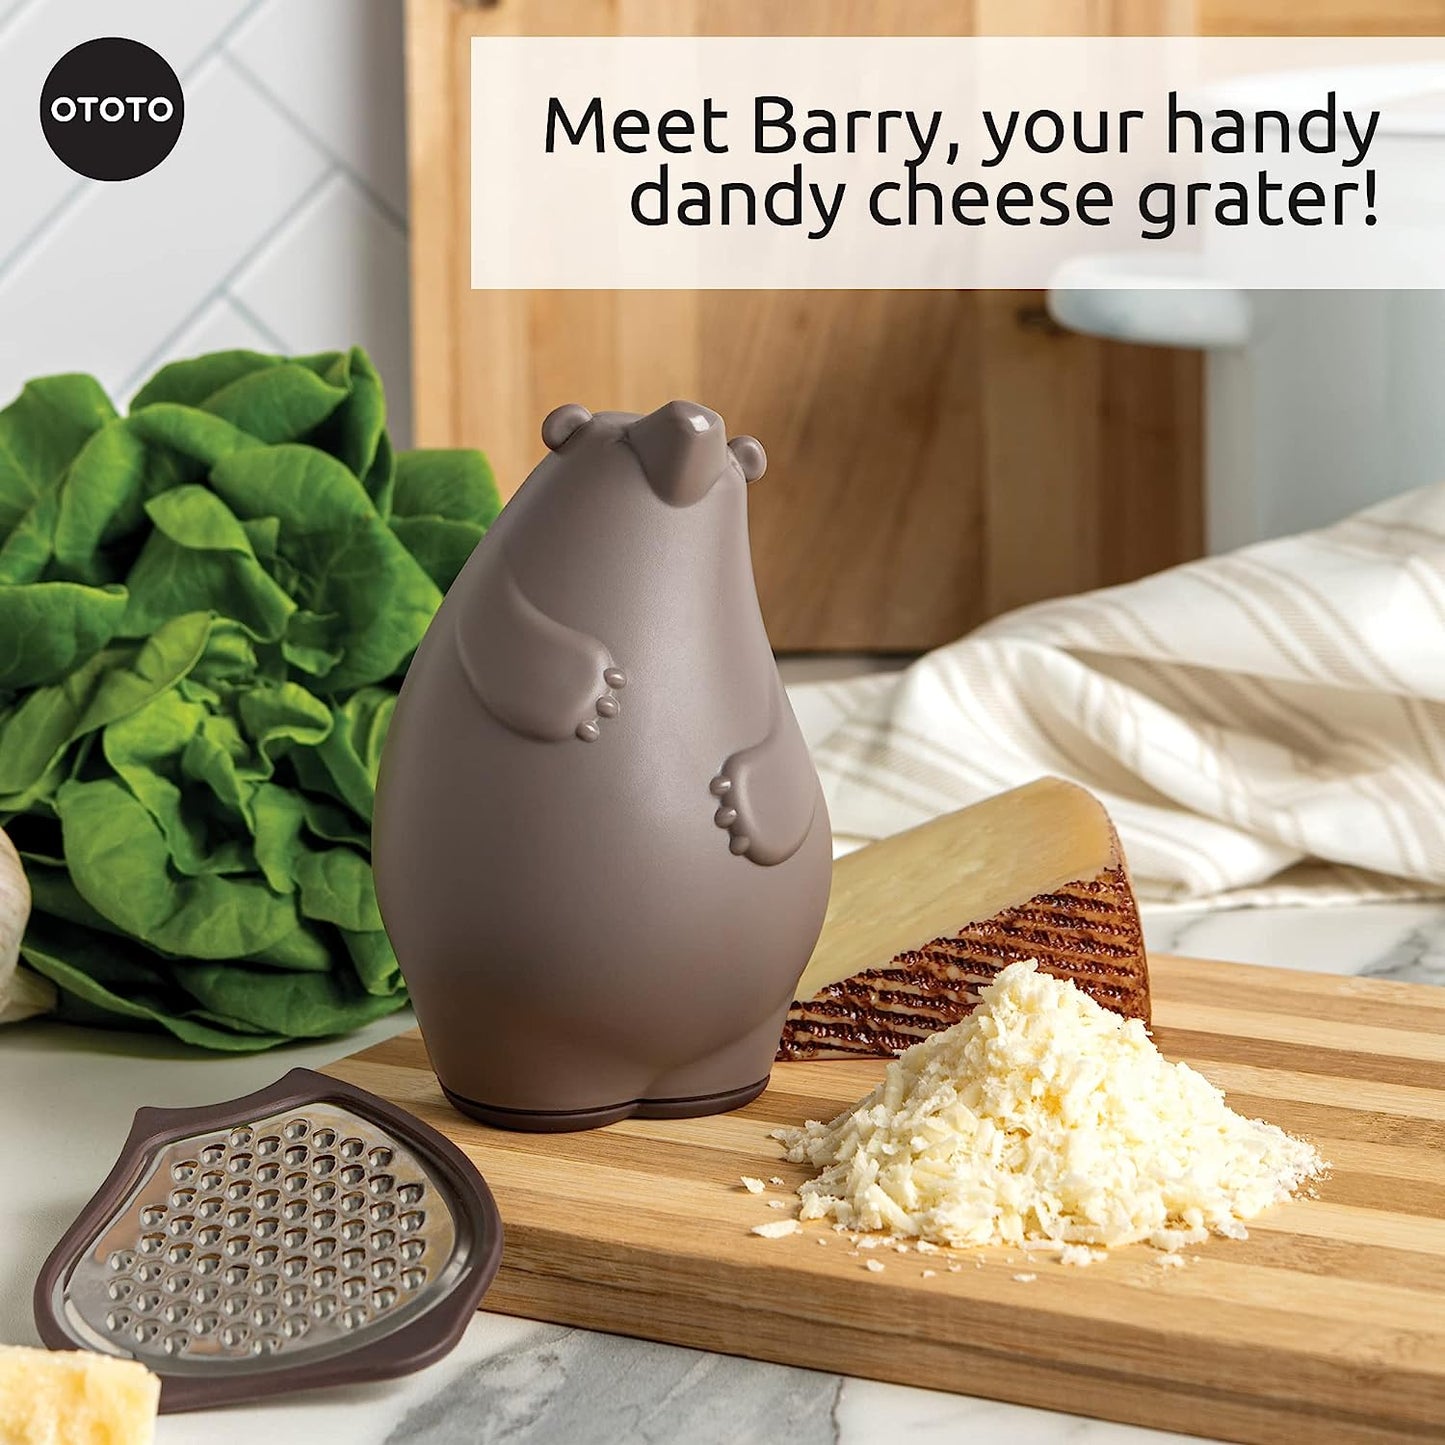 A kitchen grater shaped like a brown bear sits on a chopping board next to grated cheese.